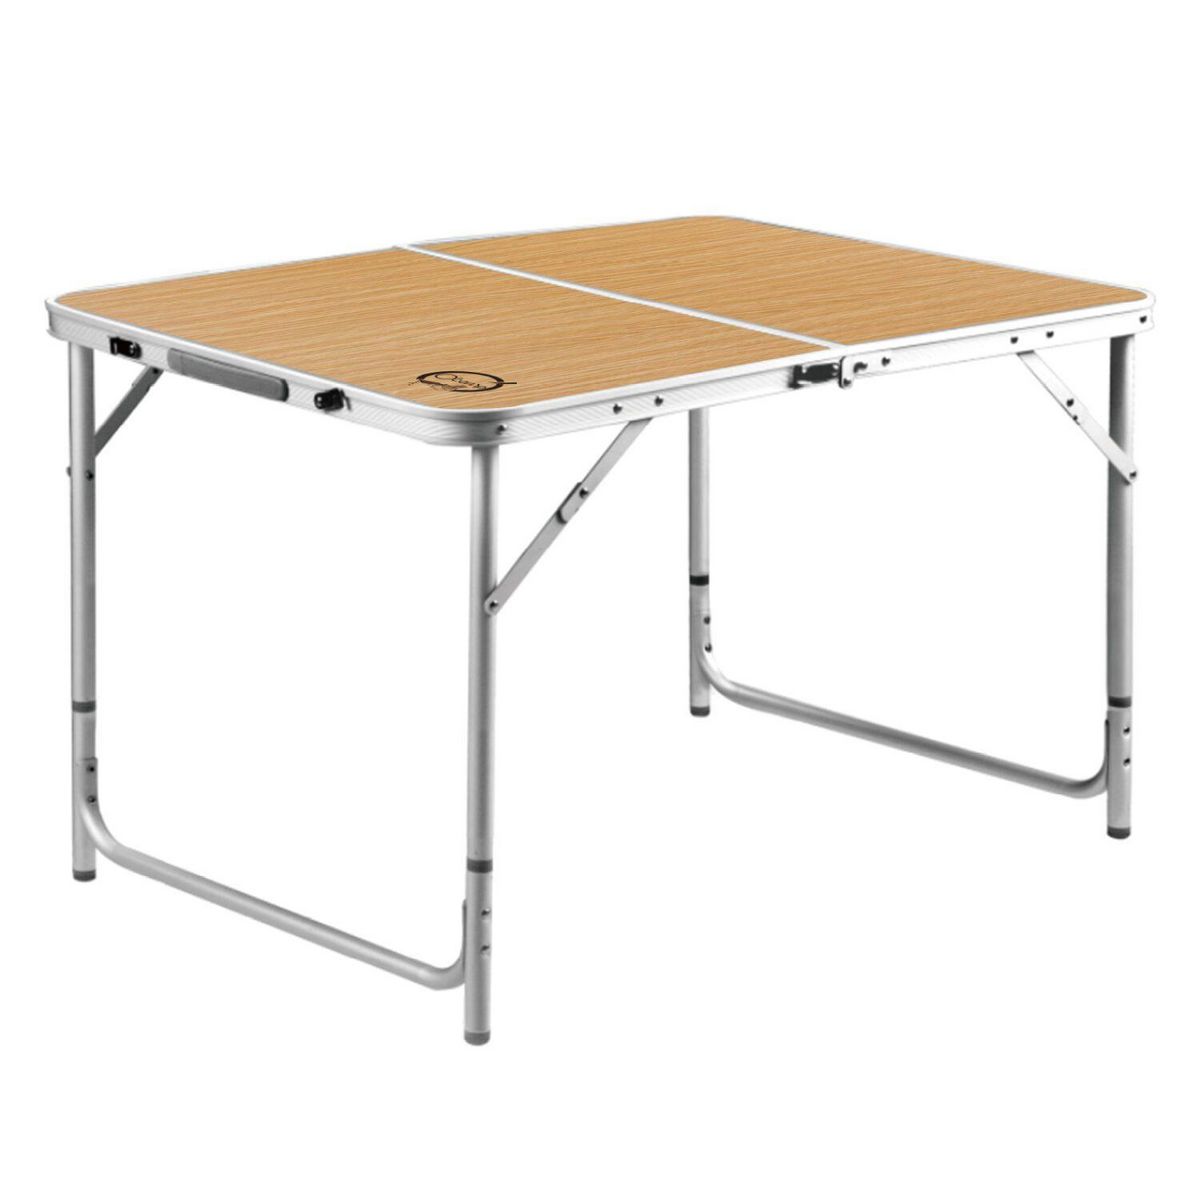 O'Camp Table de camping pliable 6 places - O'Camp - Forme valise - Dimensions : 120 x 60 x 70 cm